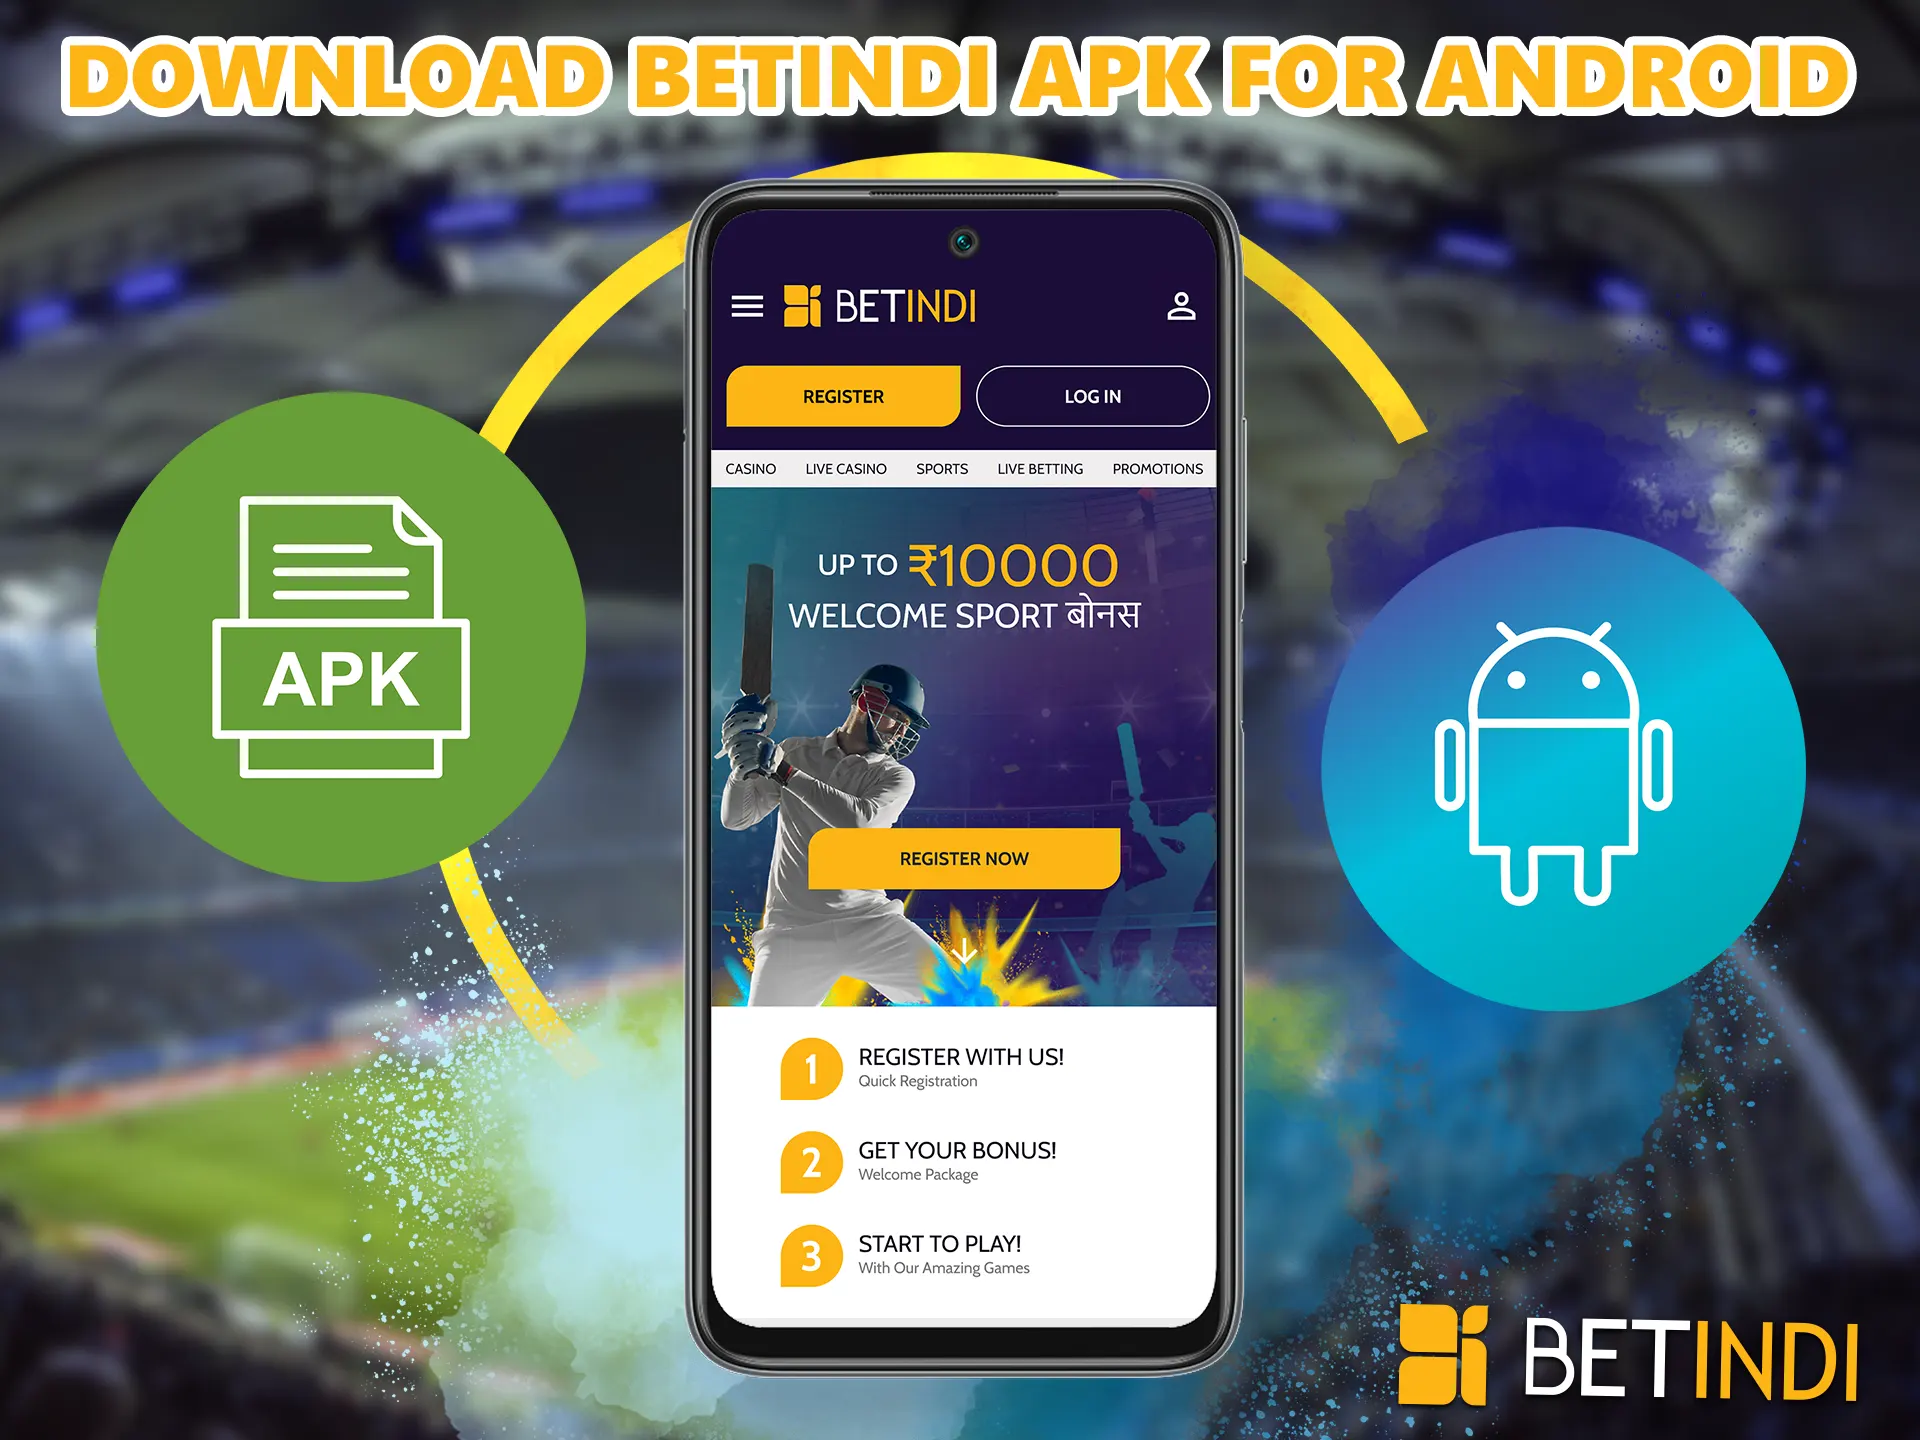 Every BetIndi bookmaker customer can get the app absolutely free, just follow our instructions.